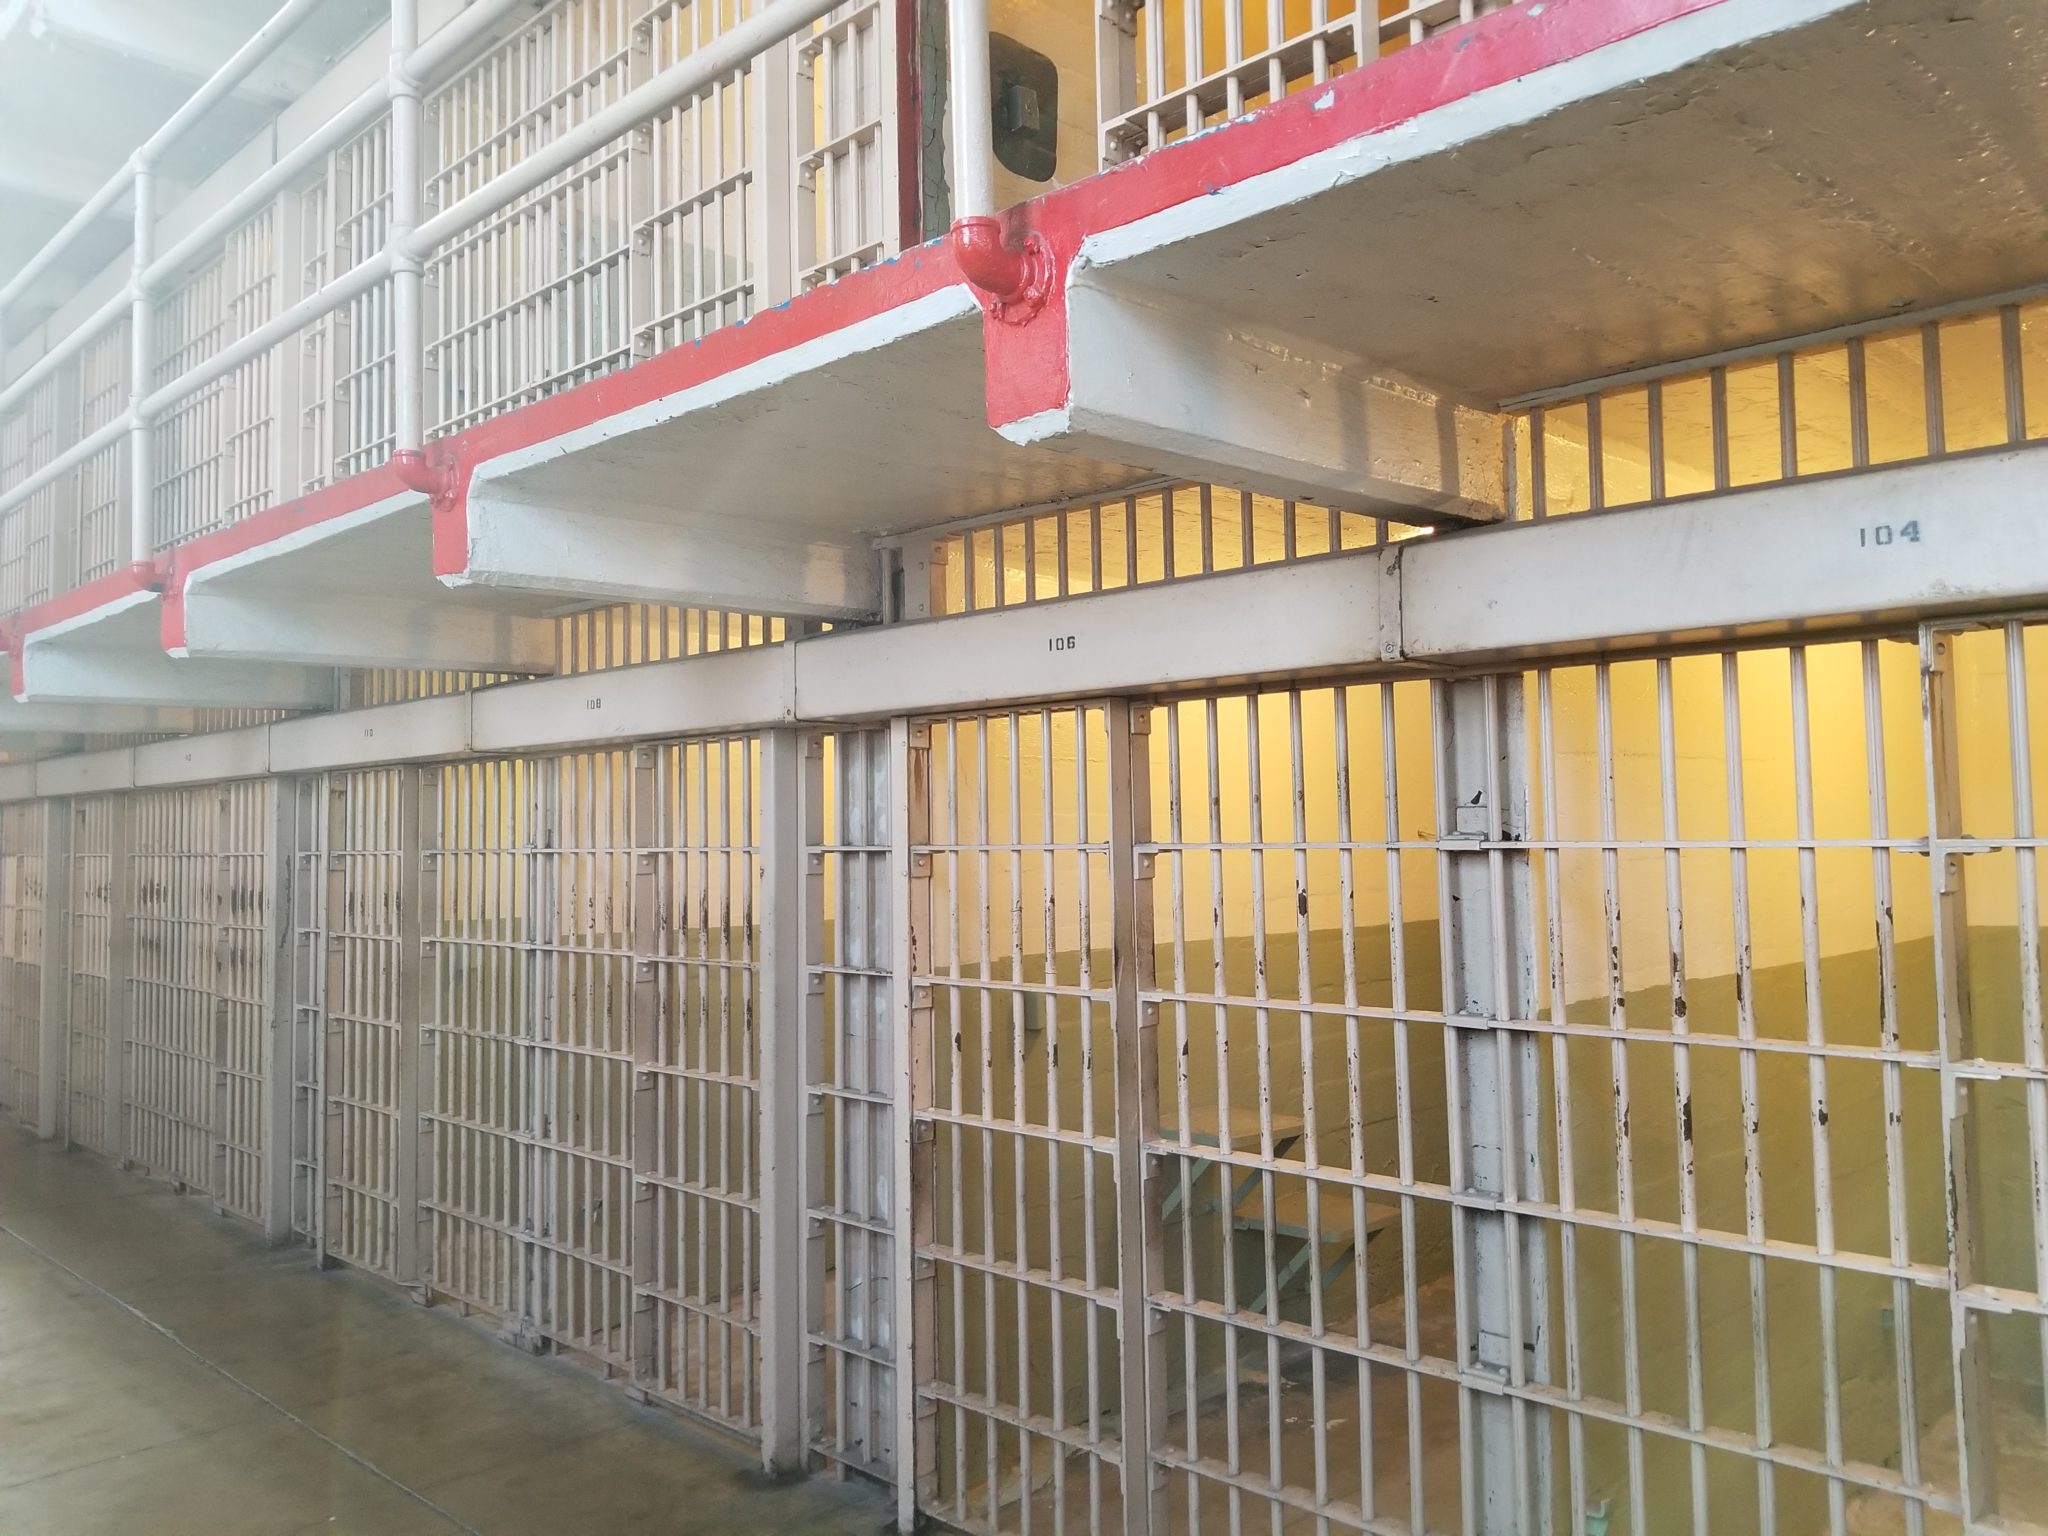 a prison cell with bars